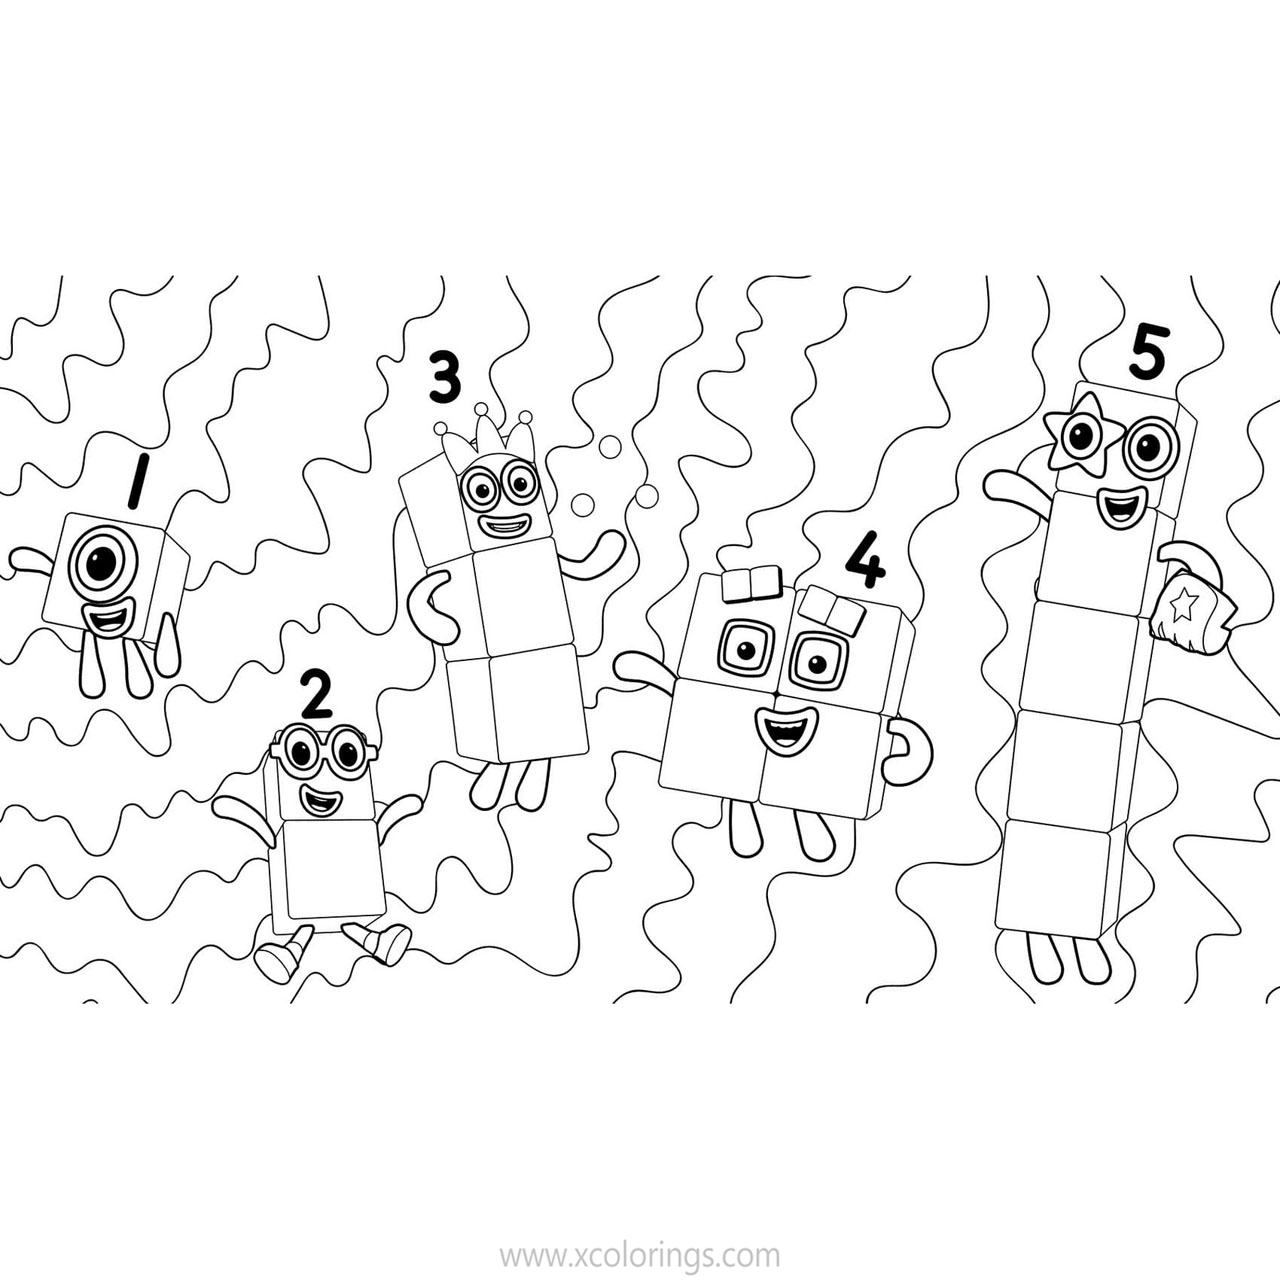 Free Numberblocks Coloring Pages 1 to 5 printable